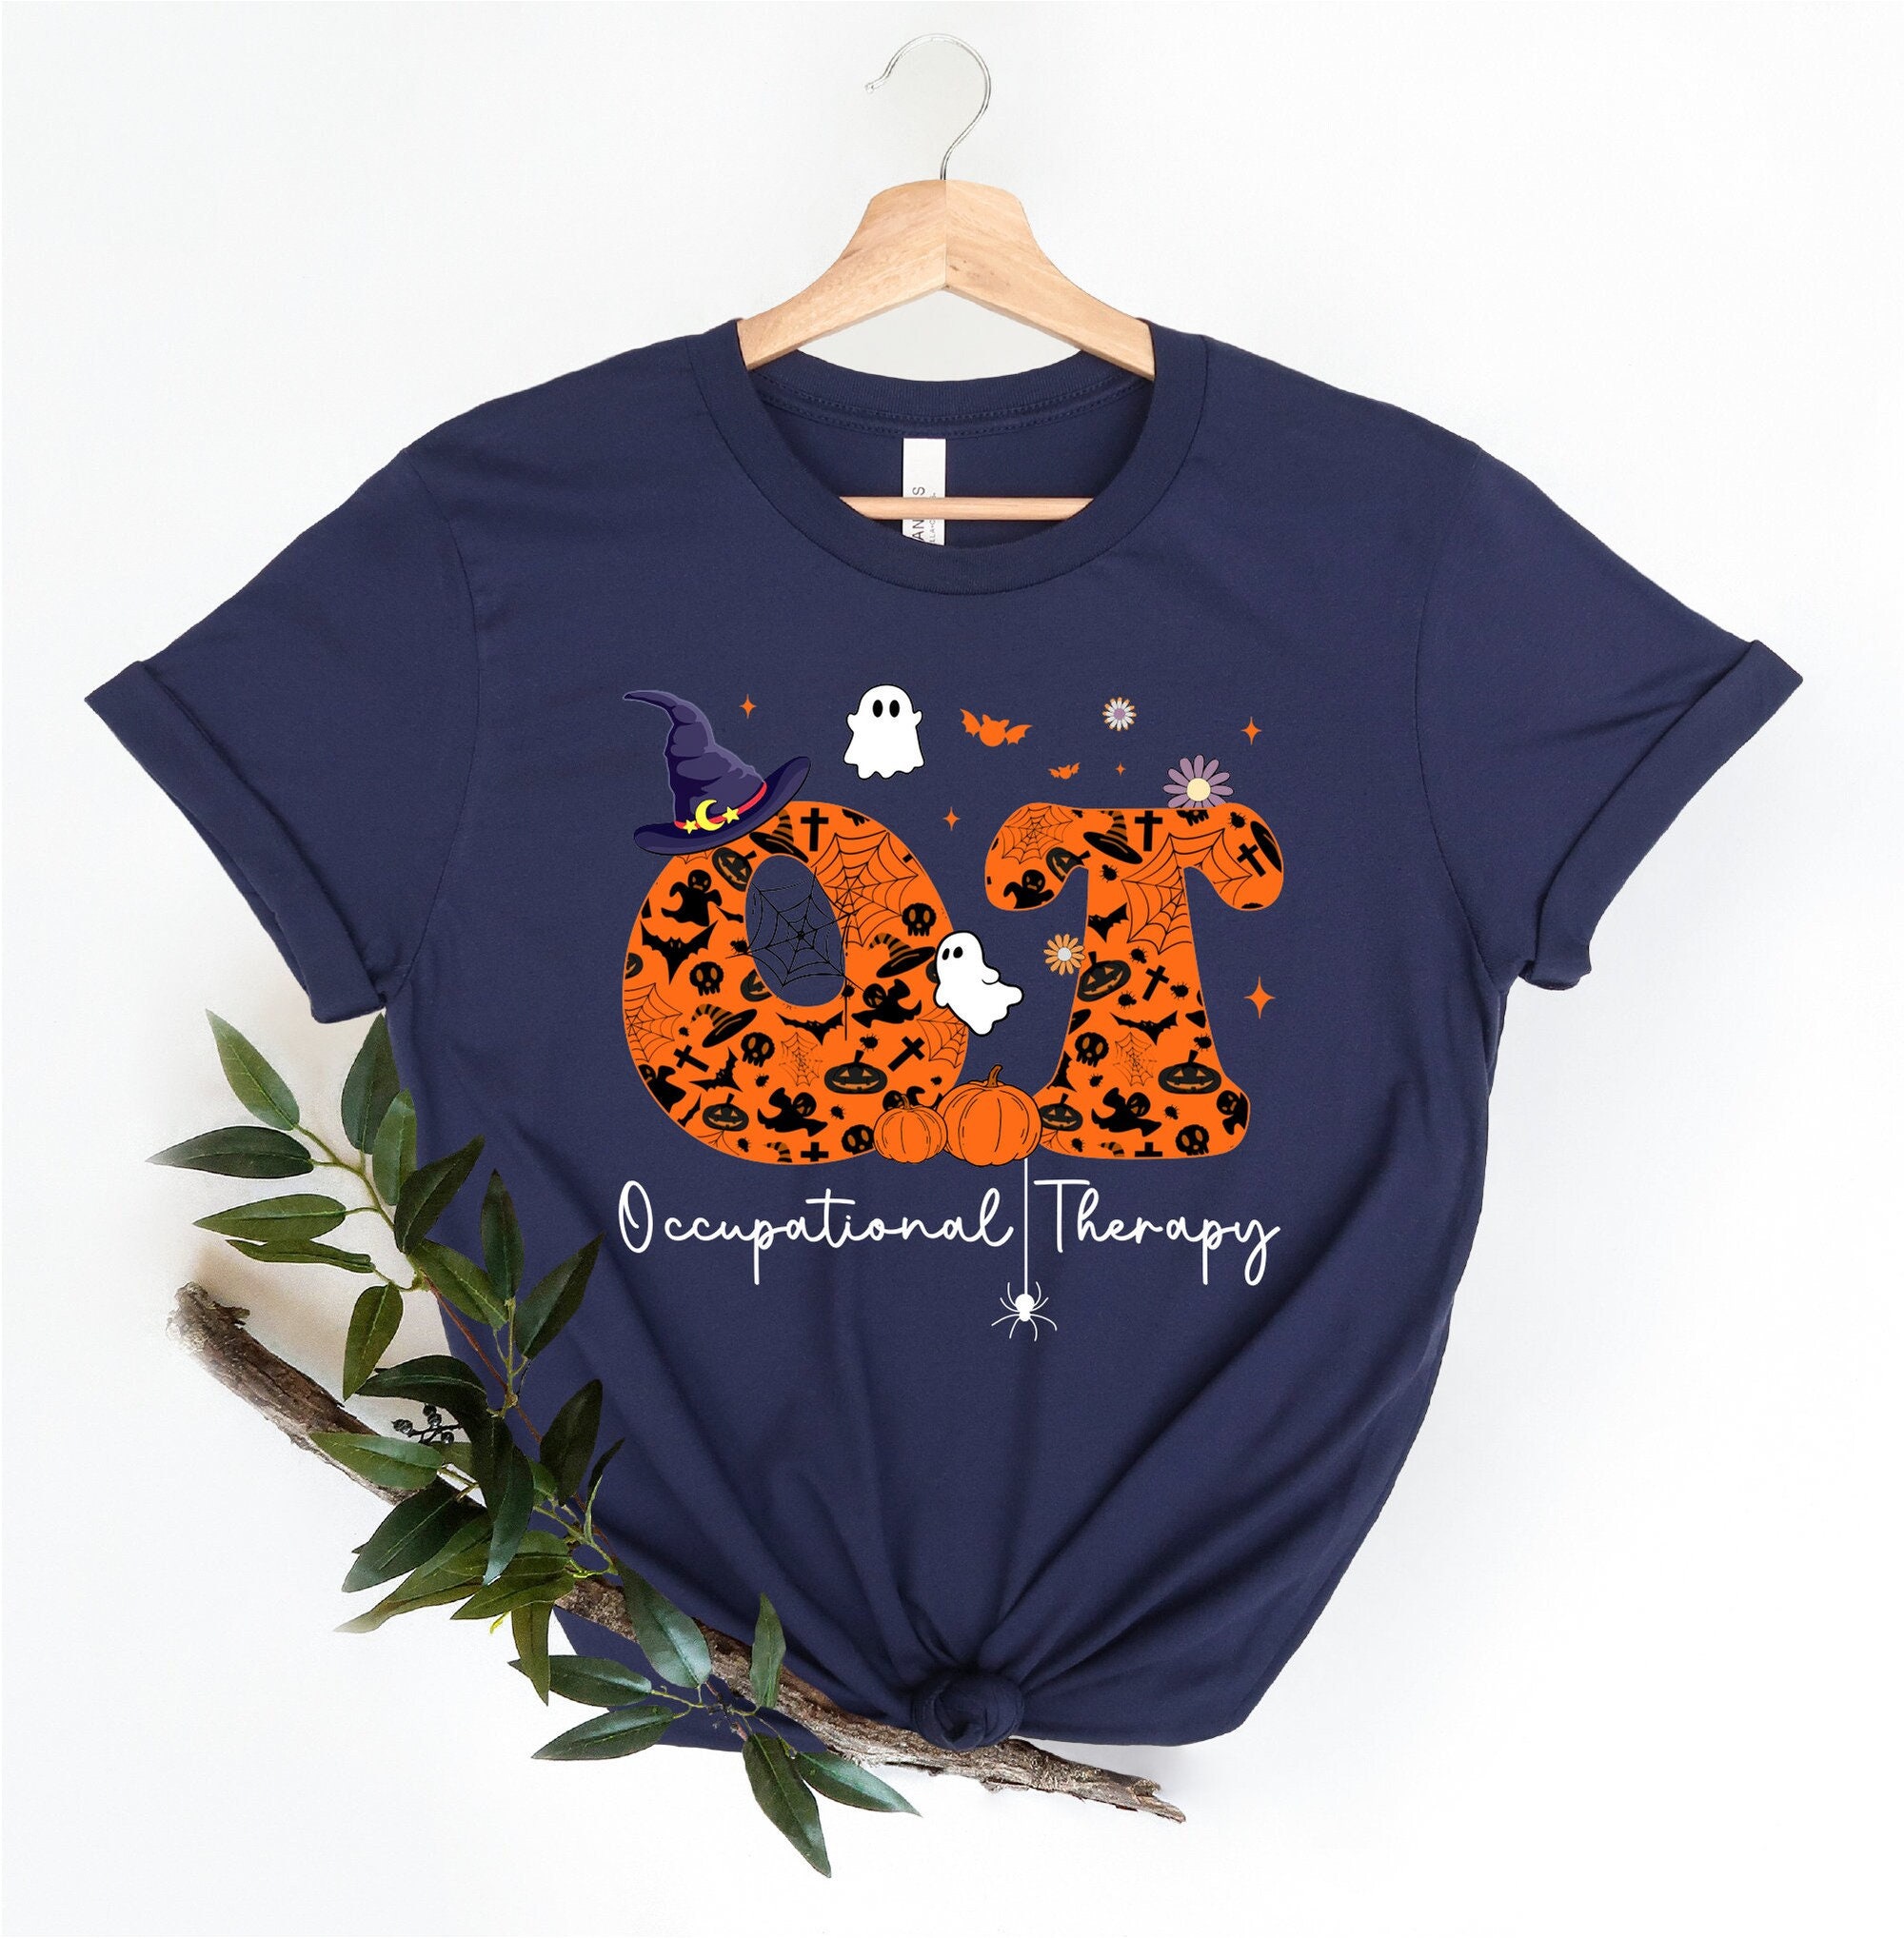 Discover Occupational Therapist Halloween Shirt, Spooky OT Shirt, Occupational Therapist Shirt, OT Shirt, Special Education Shirt, Therapist Shirt